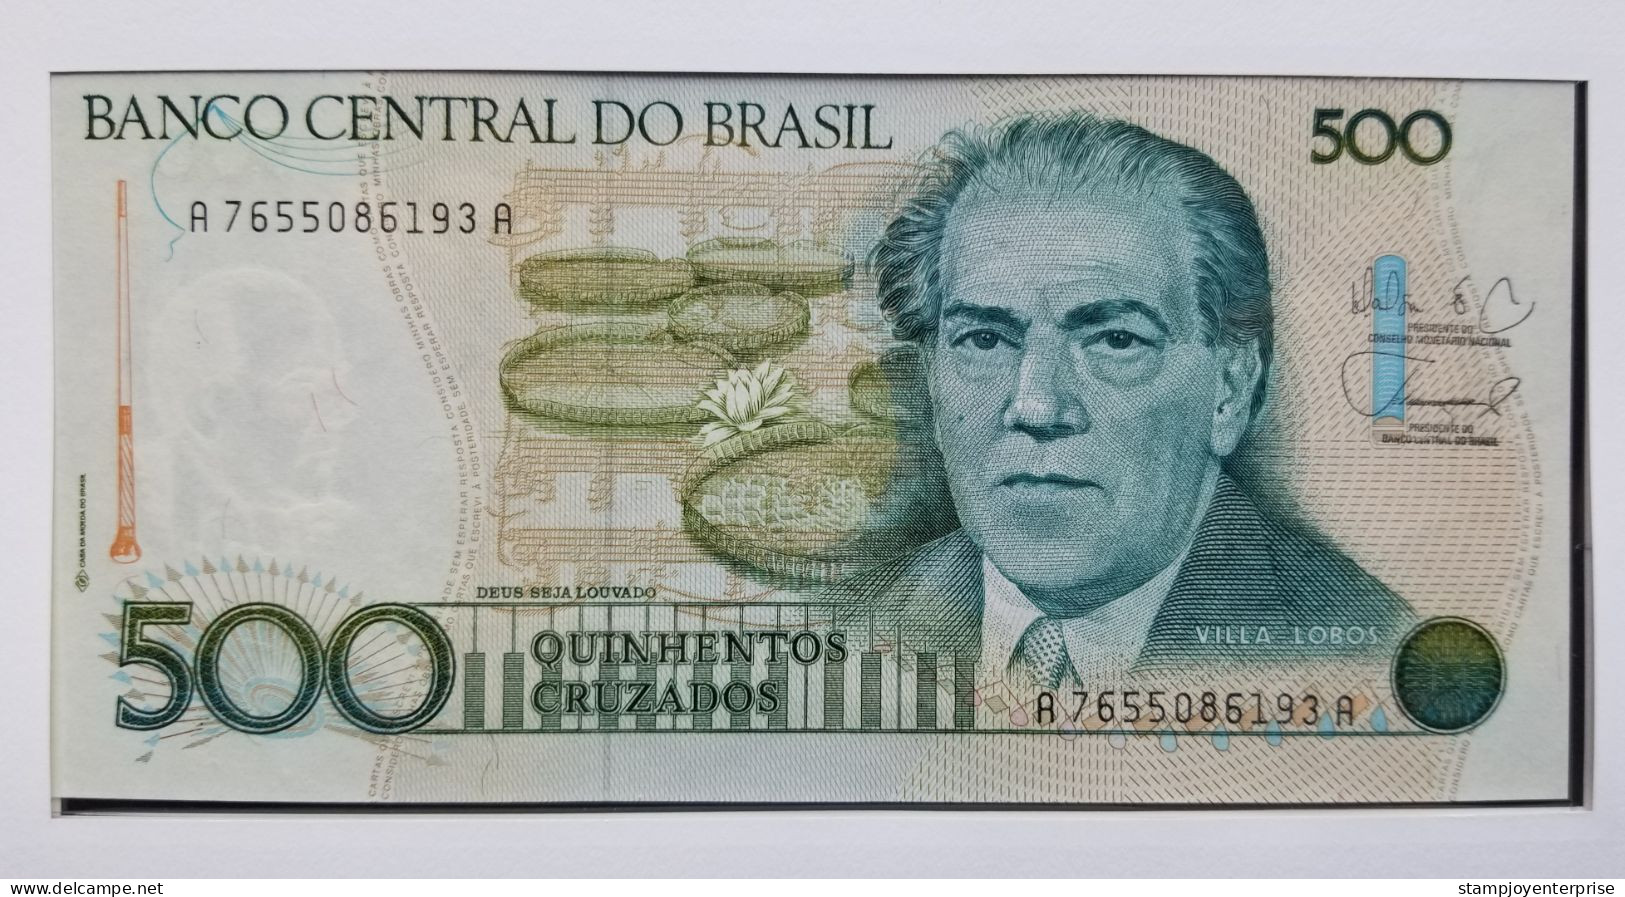 Brazil Heitor Villa-Lobos Birth Centenary 1988 Musical Instruments Music FDC (banknote Cover) *rare - Lettres & Documents